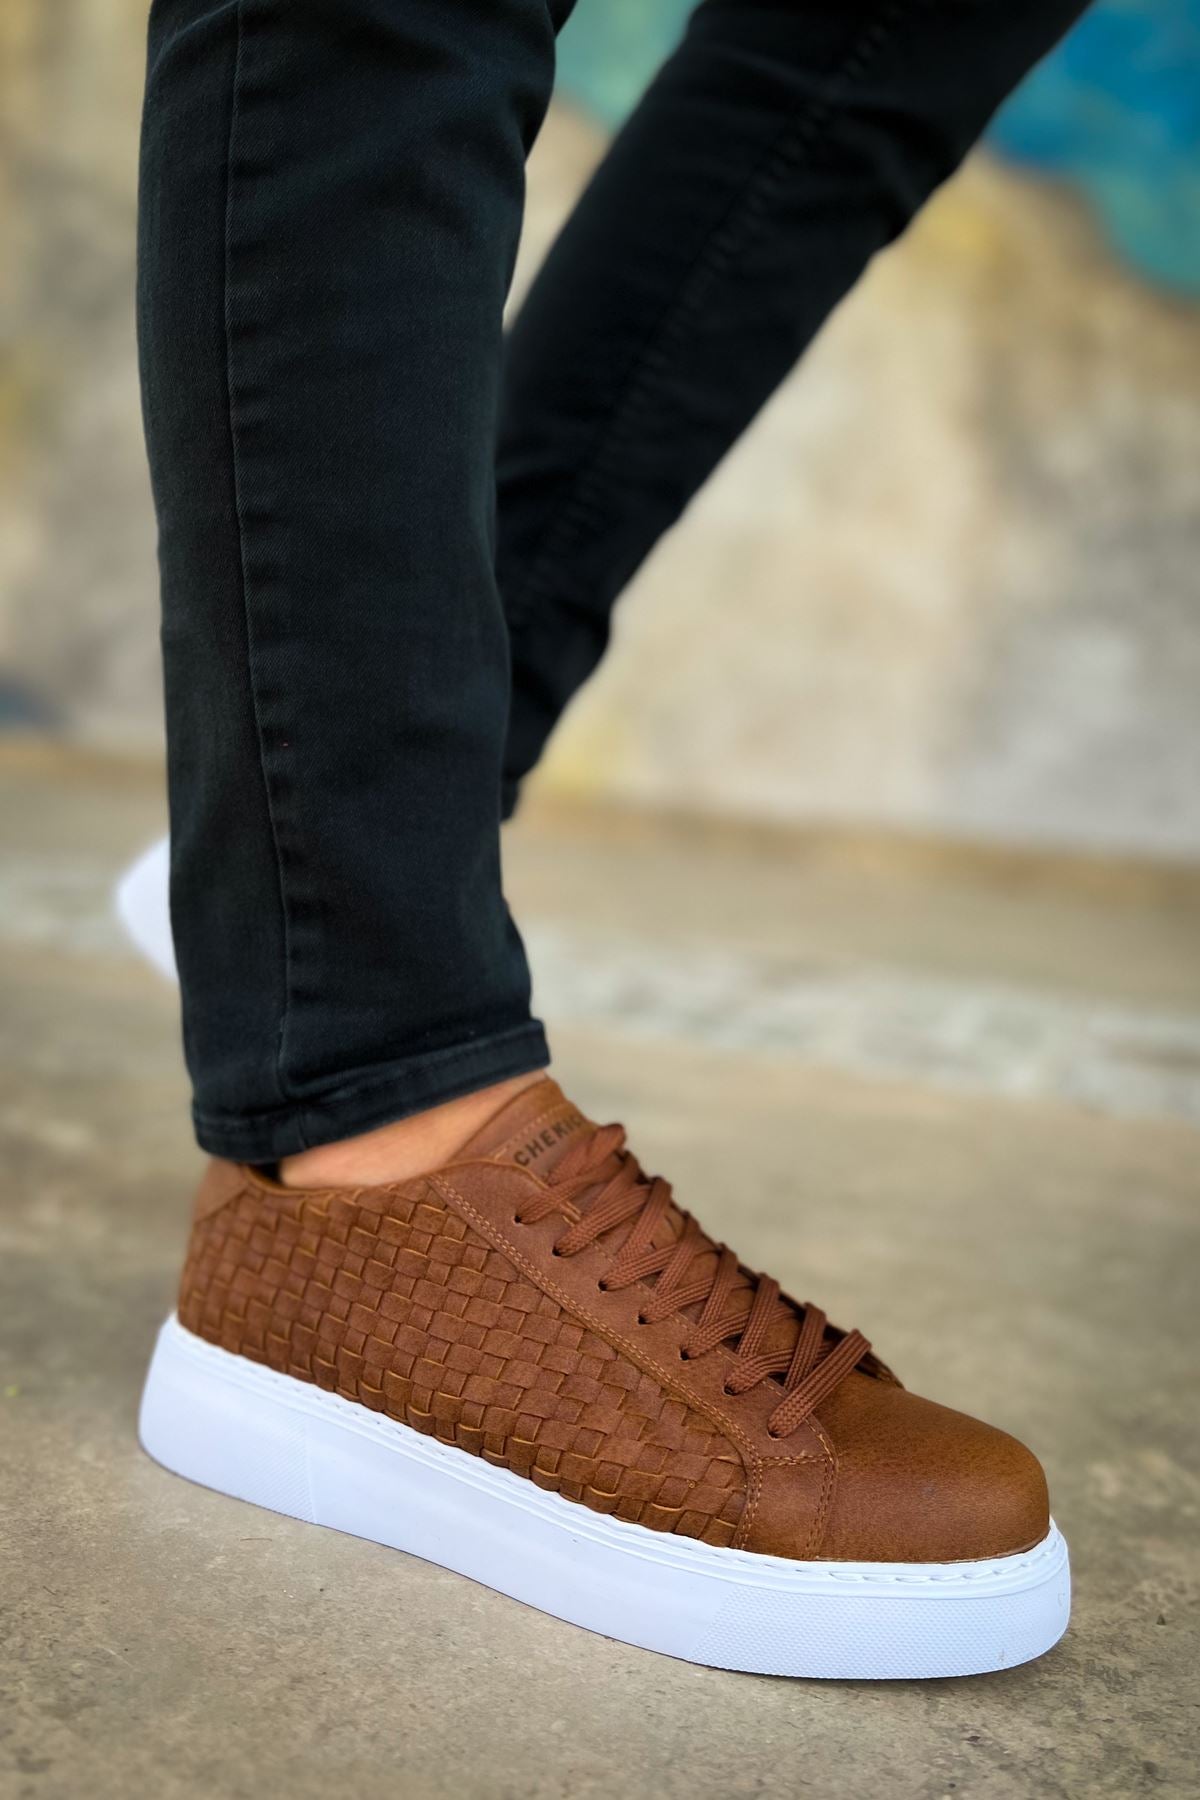 CH203 OBT Maglieria Men's sneakers Shoes Brown - STREETMODE™